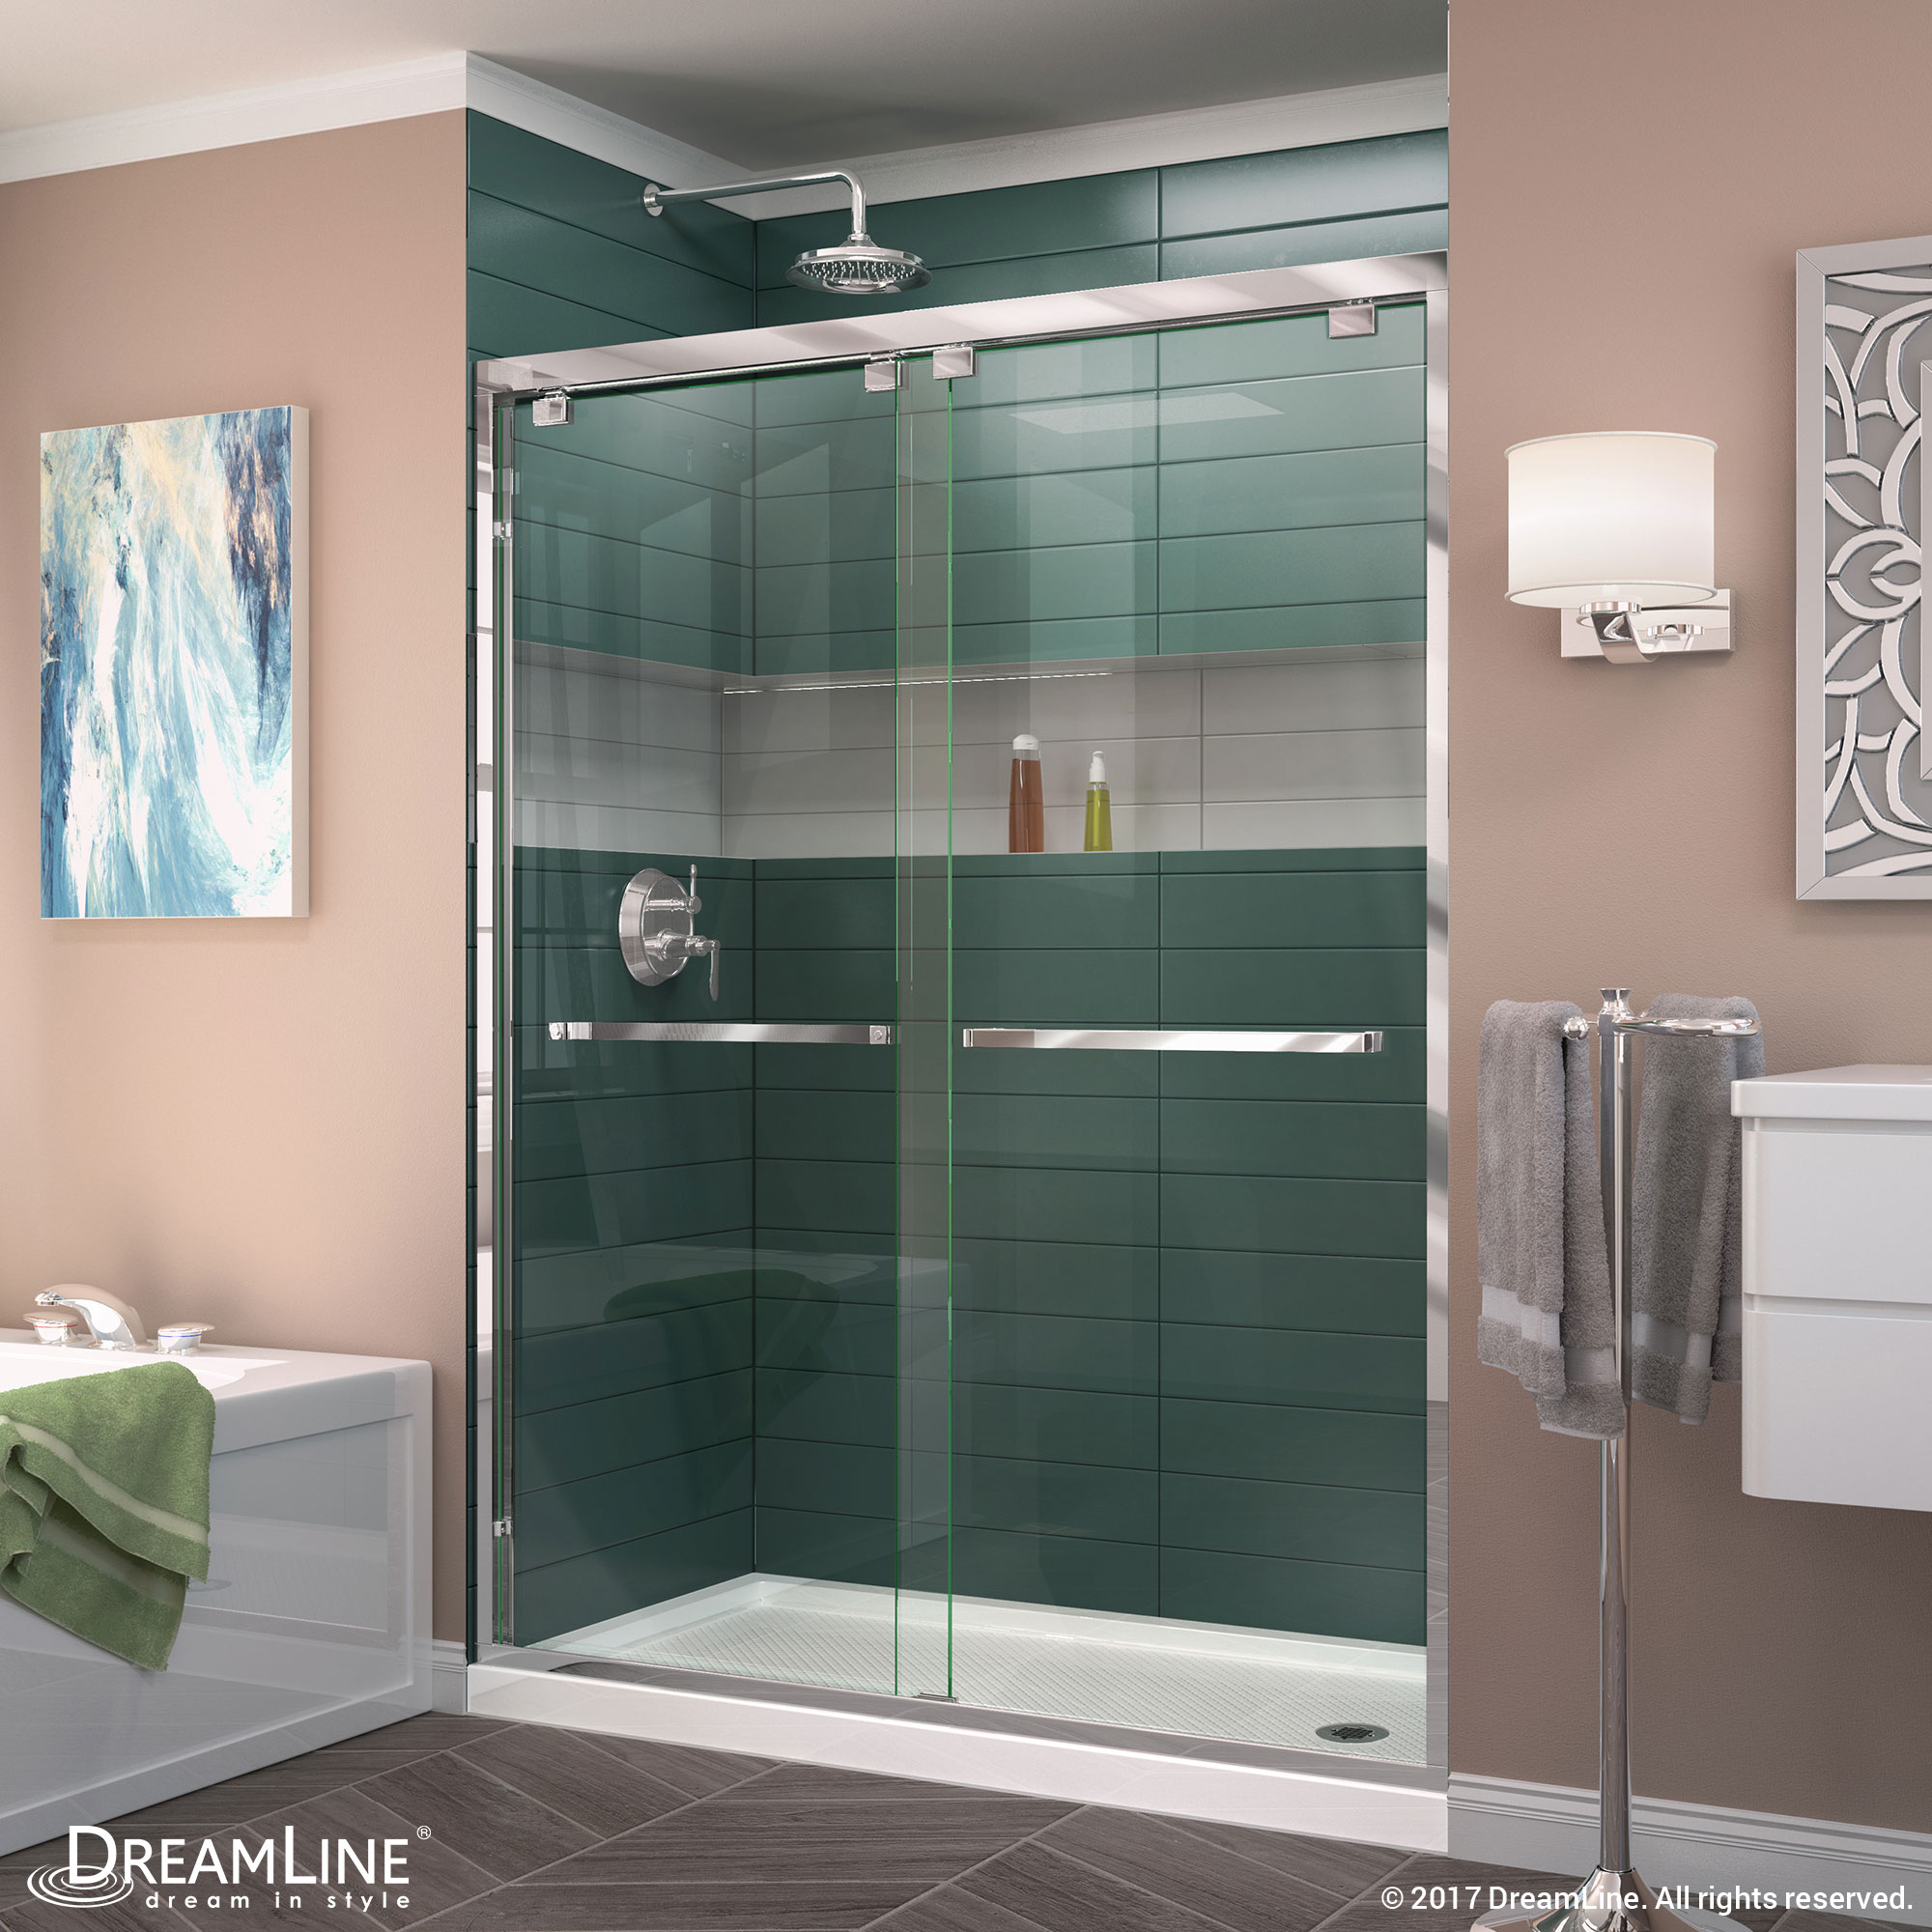 DreamLine Encore 30 in. D x 60 in. W x 78 3/4 in. H Bypass Shower Door in Satin Black and Right Drain White Base Kit